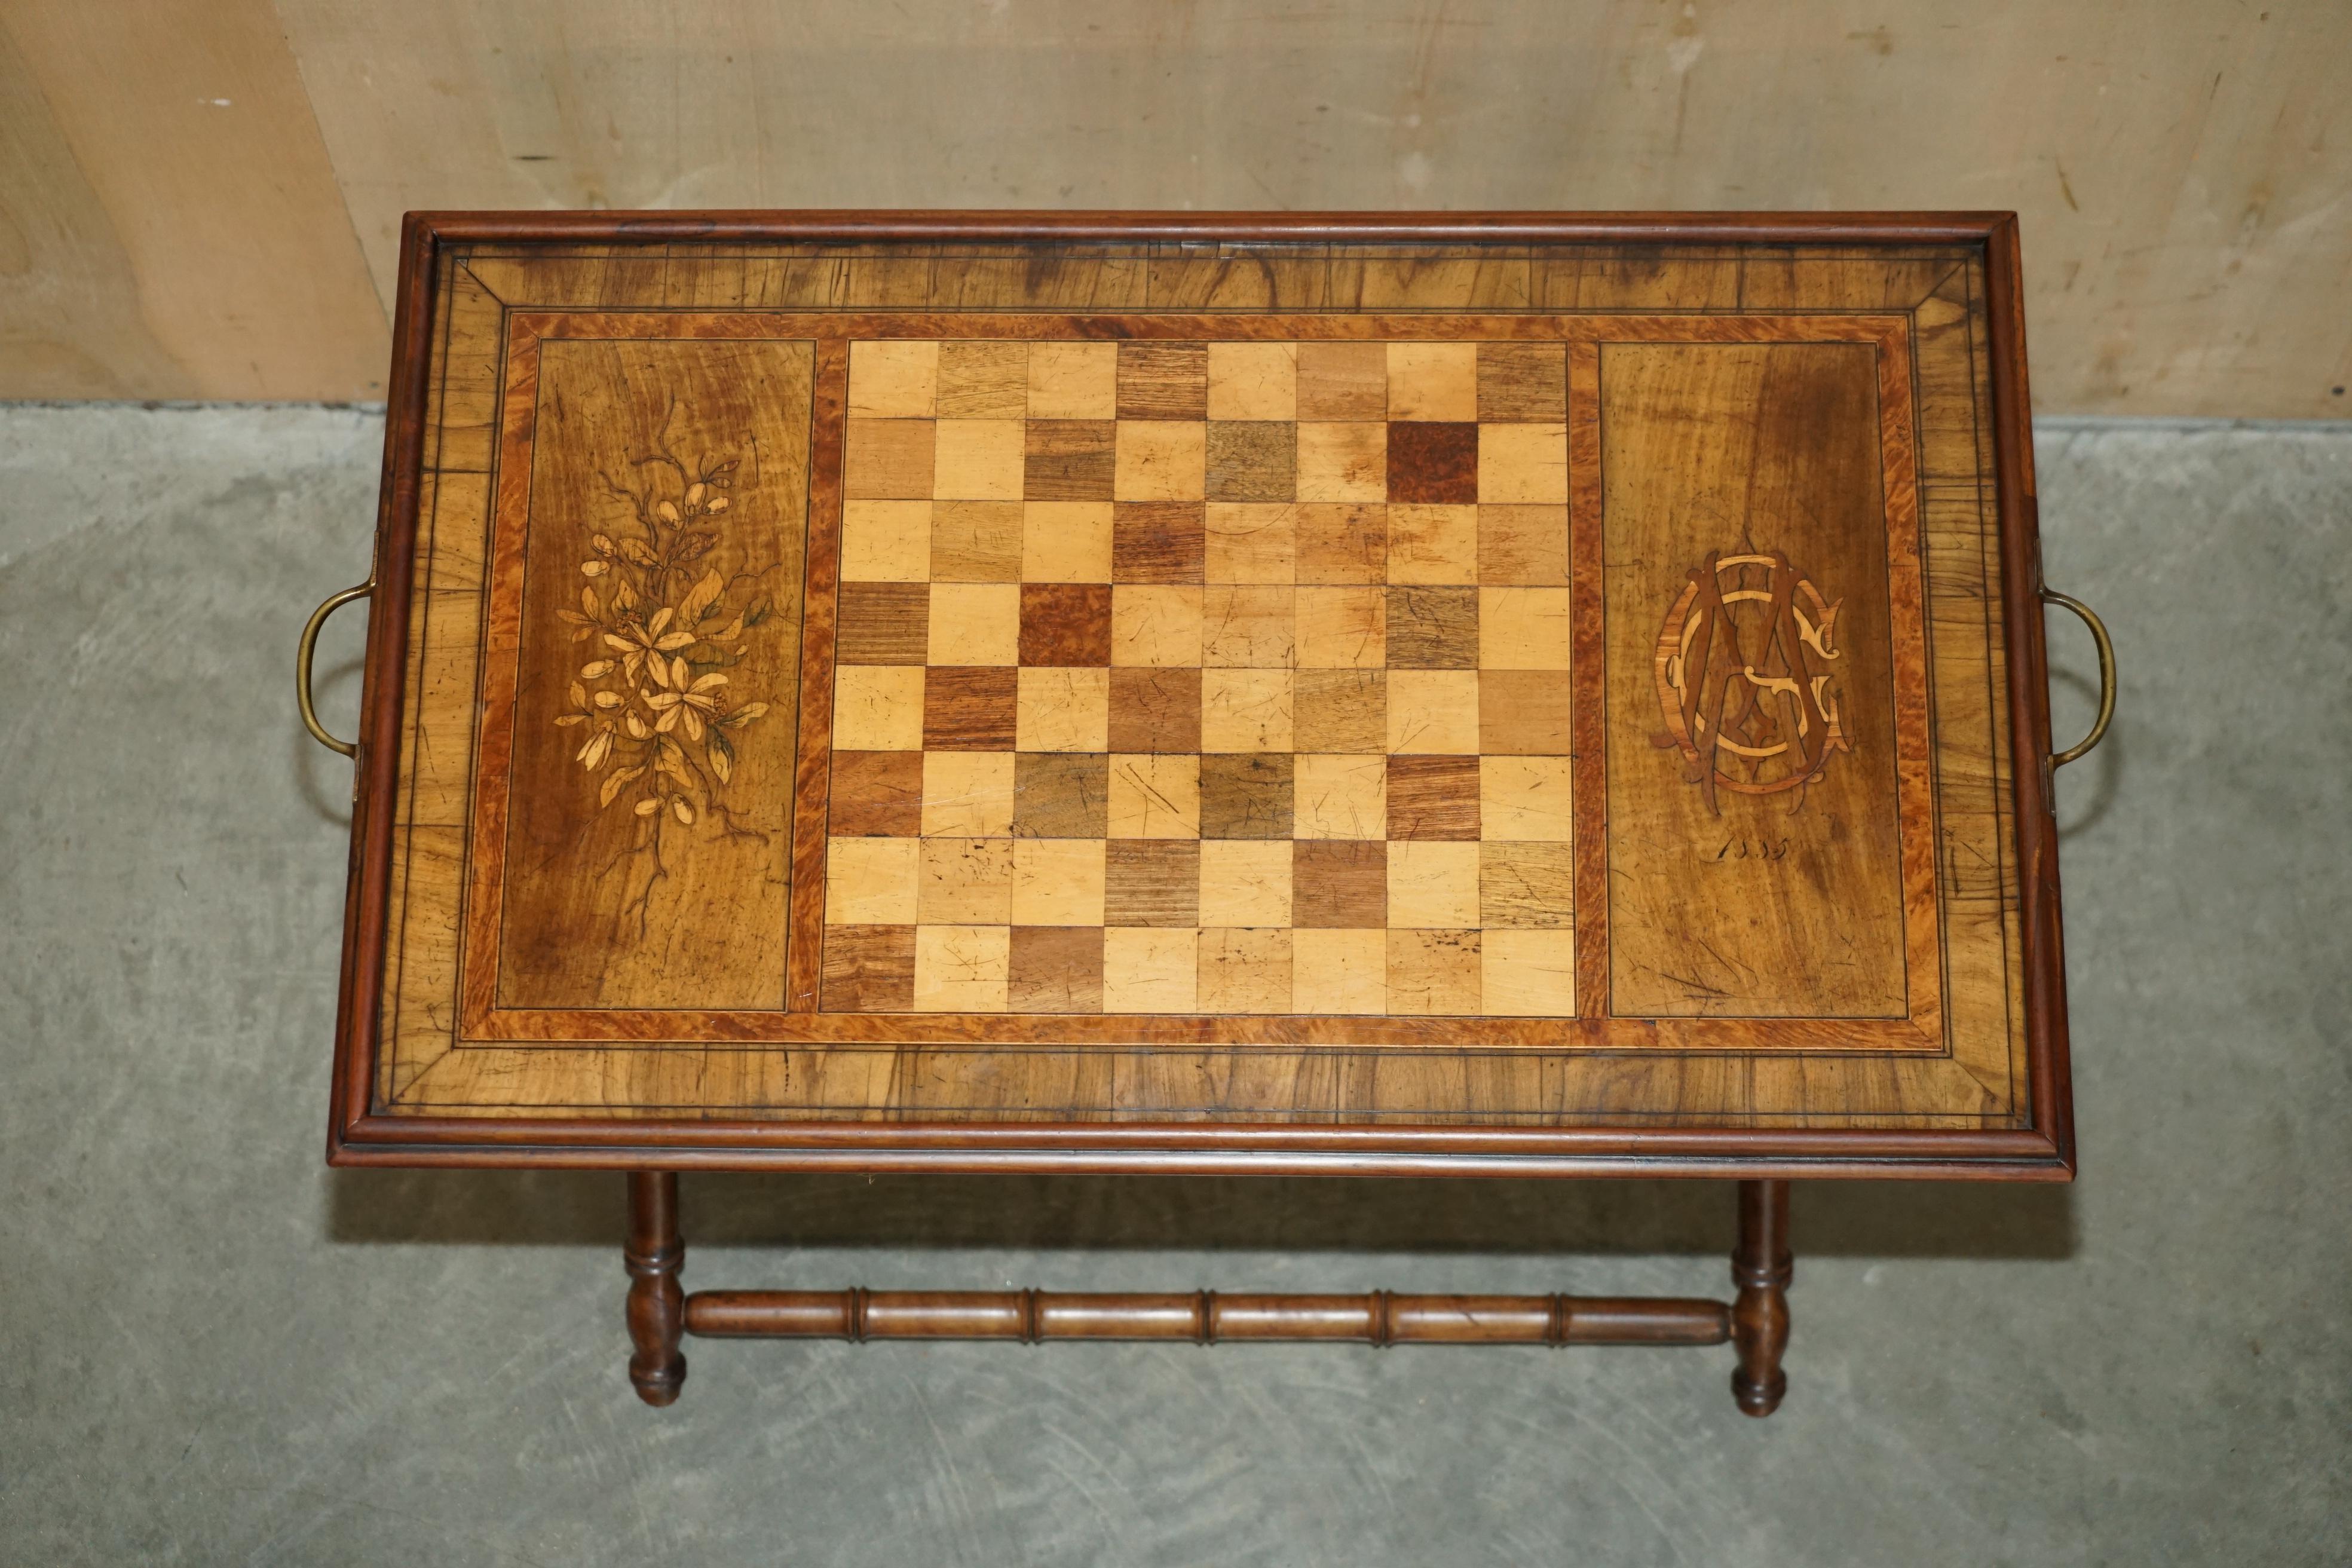 1885 DATED ANTiQUE WALNUT HARDWOOD CHESSBOARD FOLDING GAMES CHESS TRAY TABLE For Sale 9